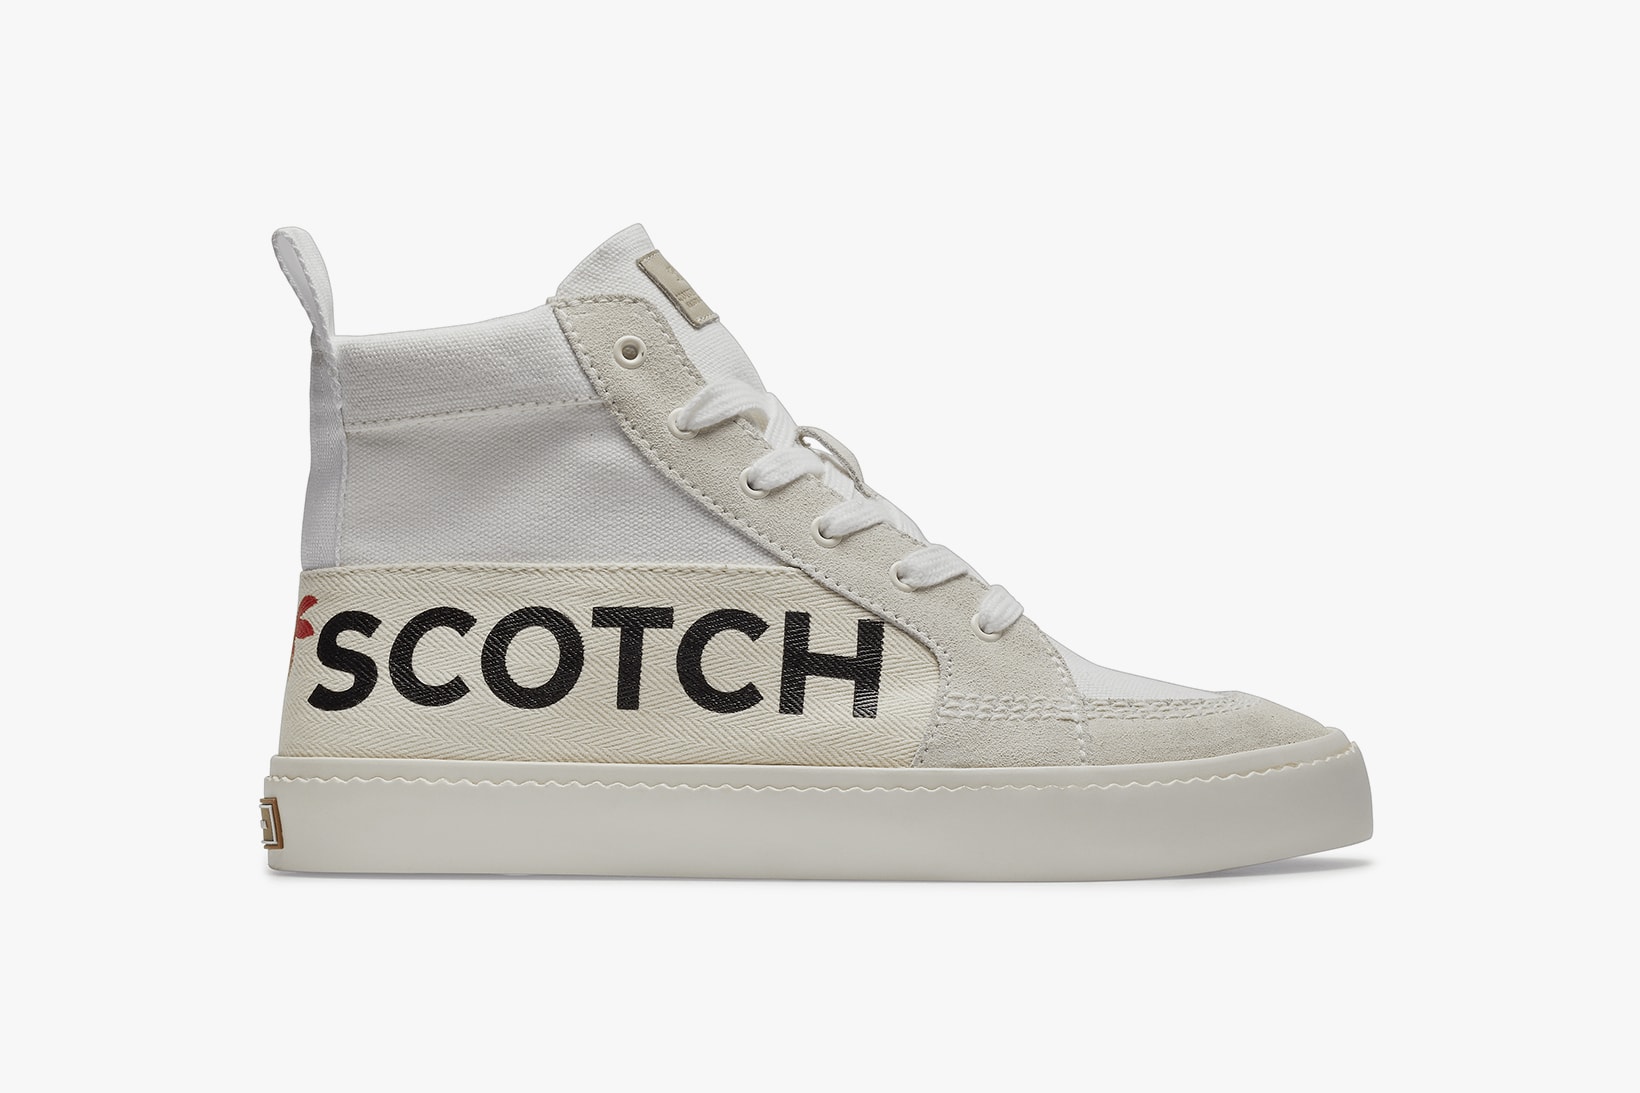 Scotch & Soda SS19 Footwear Collection Skate Shoe Chunky Sneakers Pumps